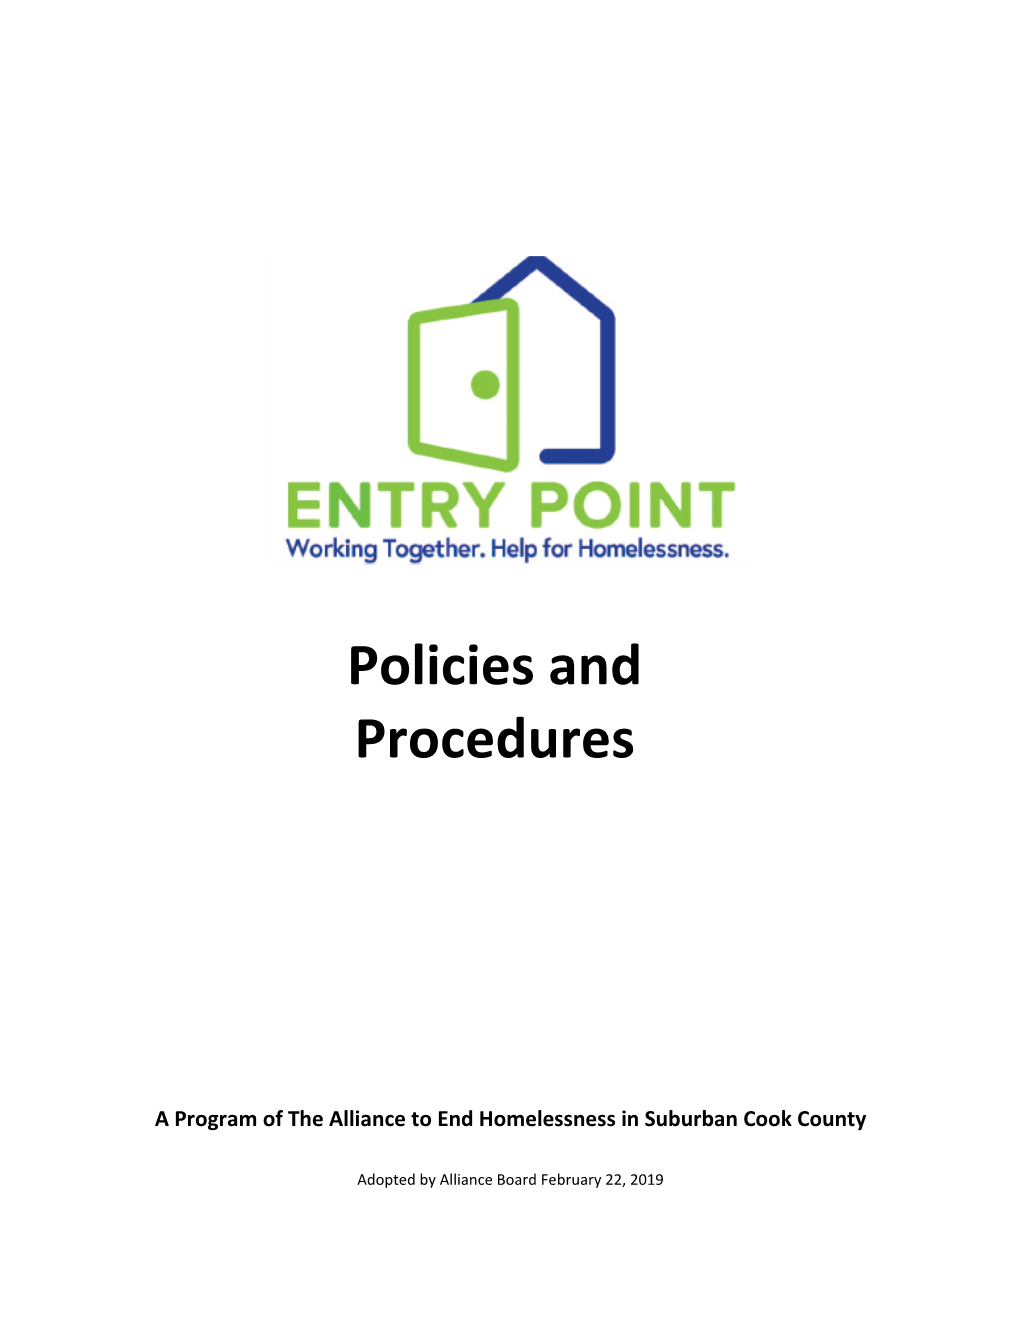 Entry Point Operations Manual